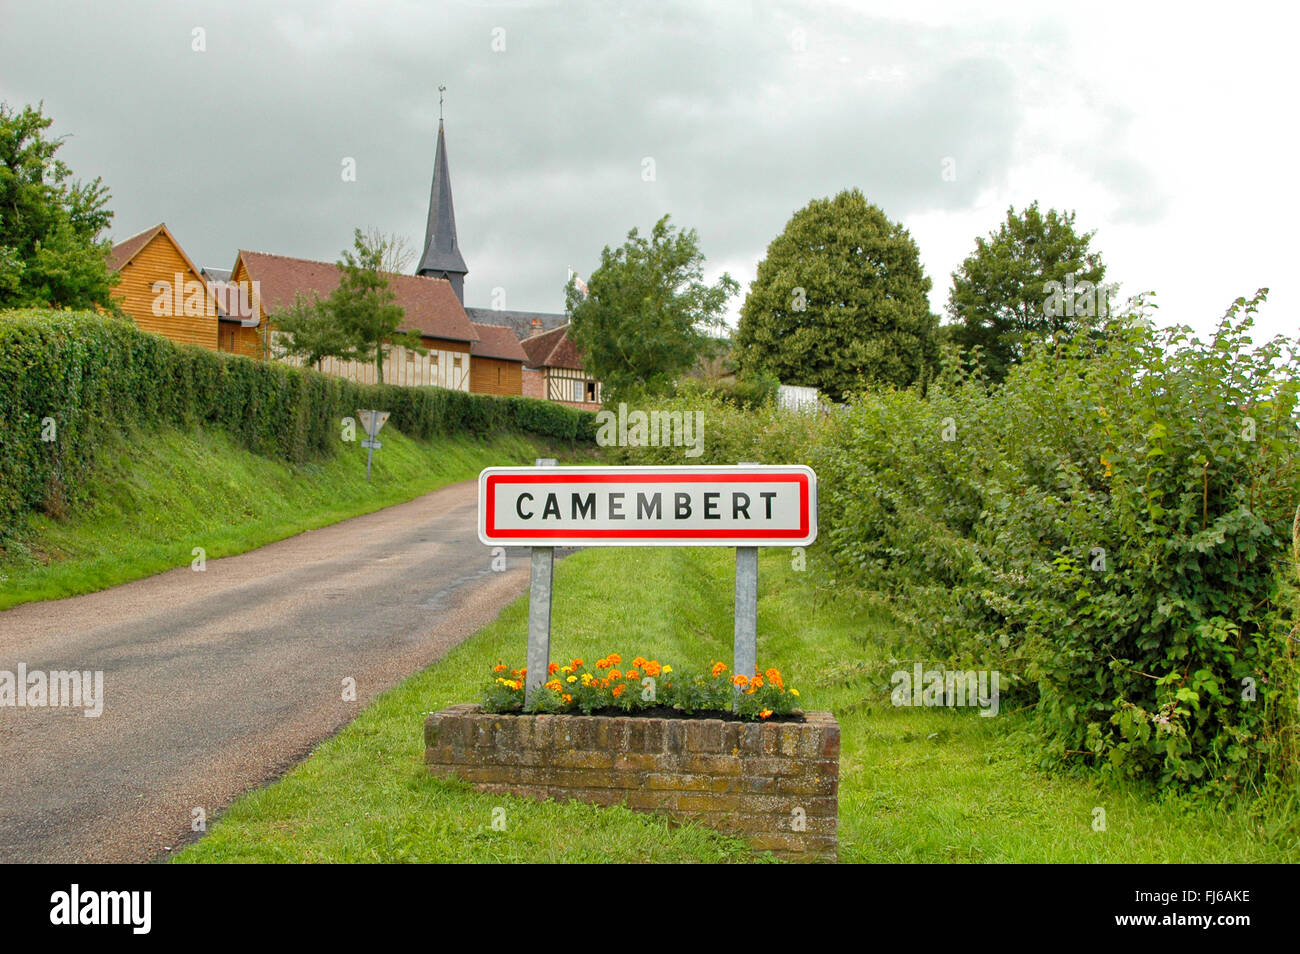 city limit sign of camembert, place of origin camembert cheese, France, Normandy, Basse-Normandie, Camembert Stock Photo